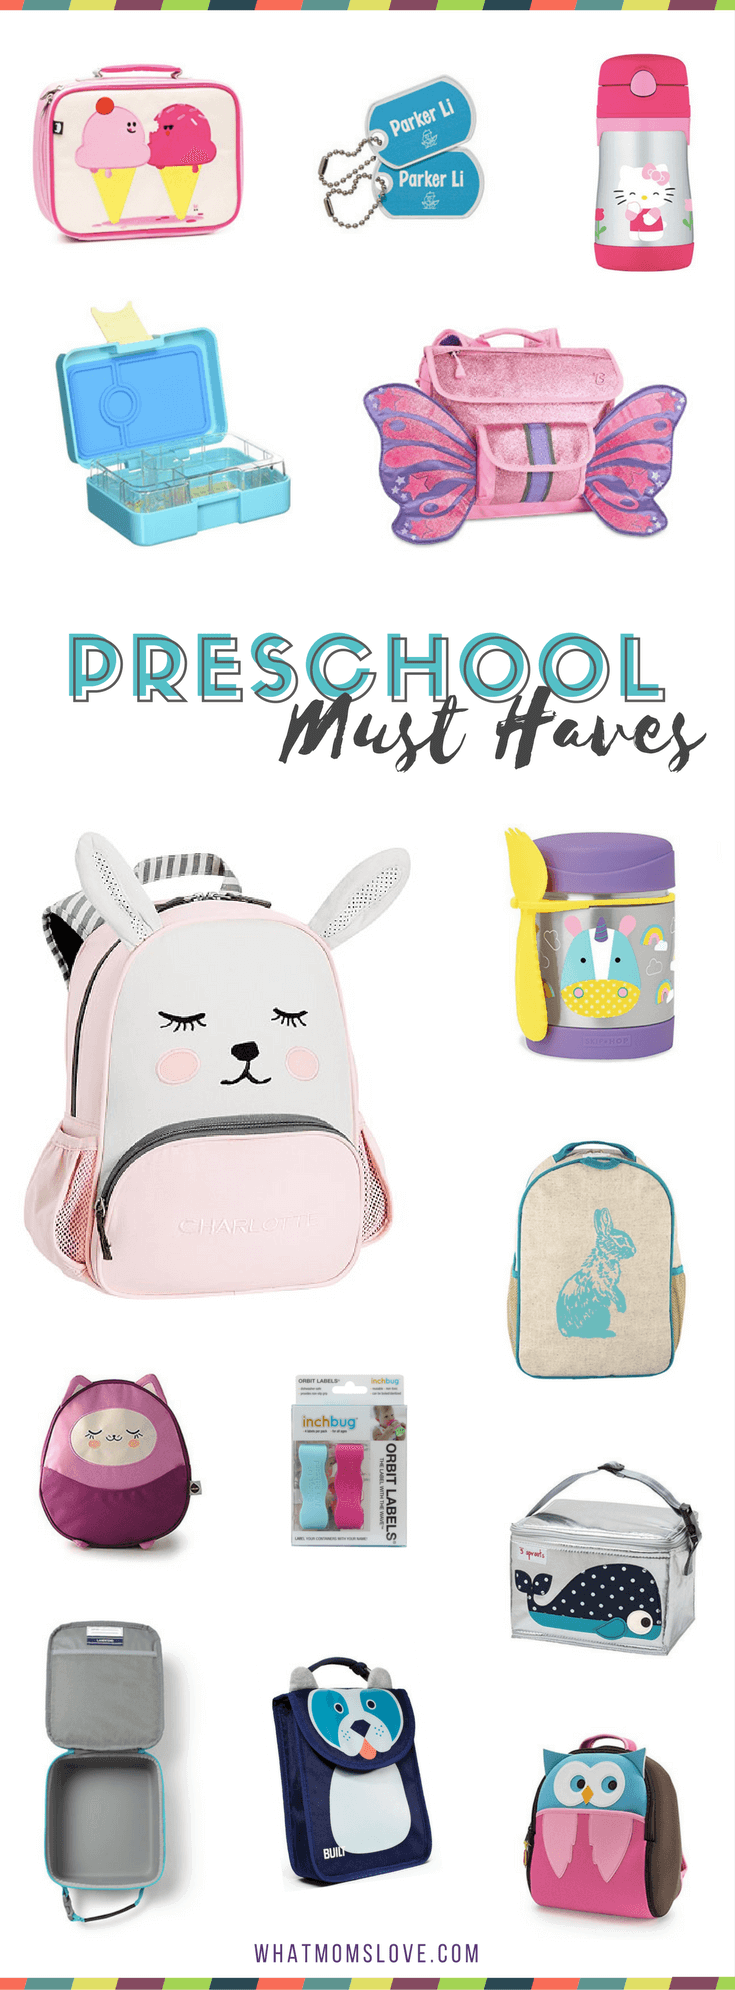 Back to School - Preschool Toddler Essentials and Supplies - Small backpacks, lunch bags, gear